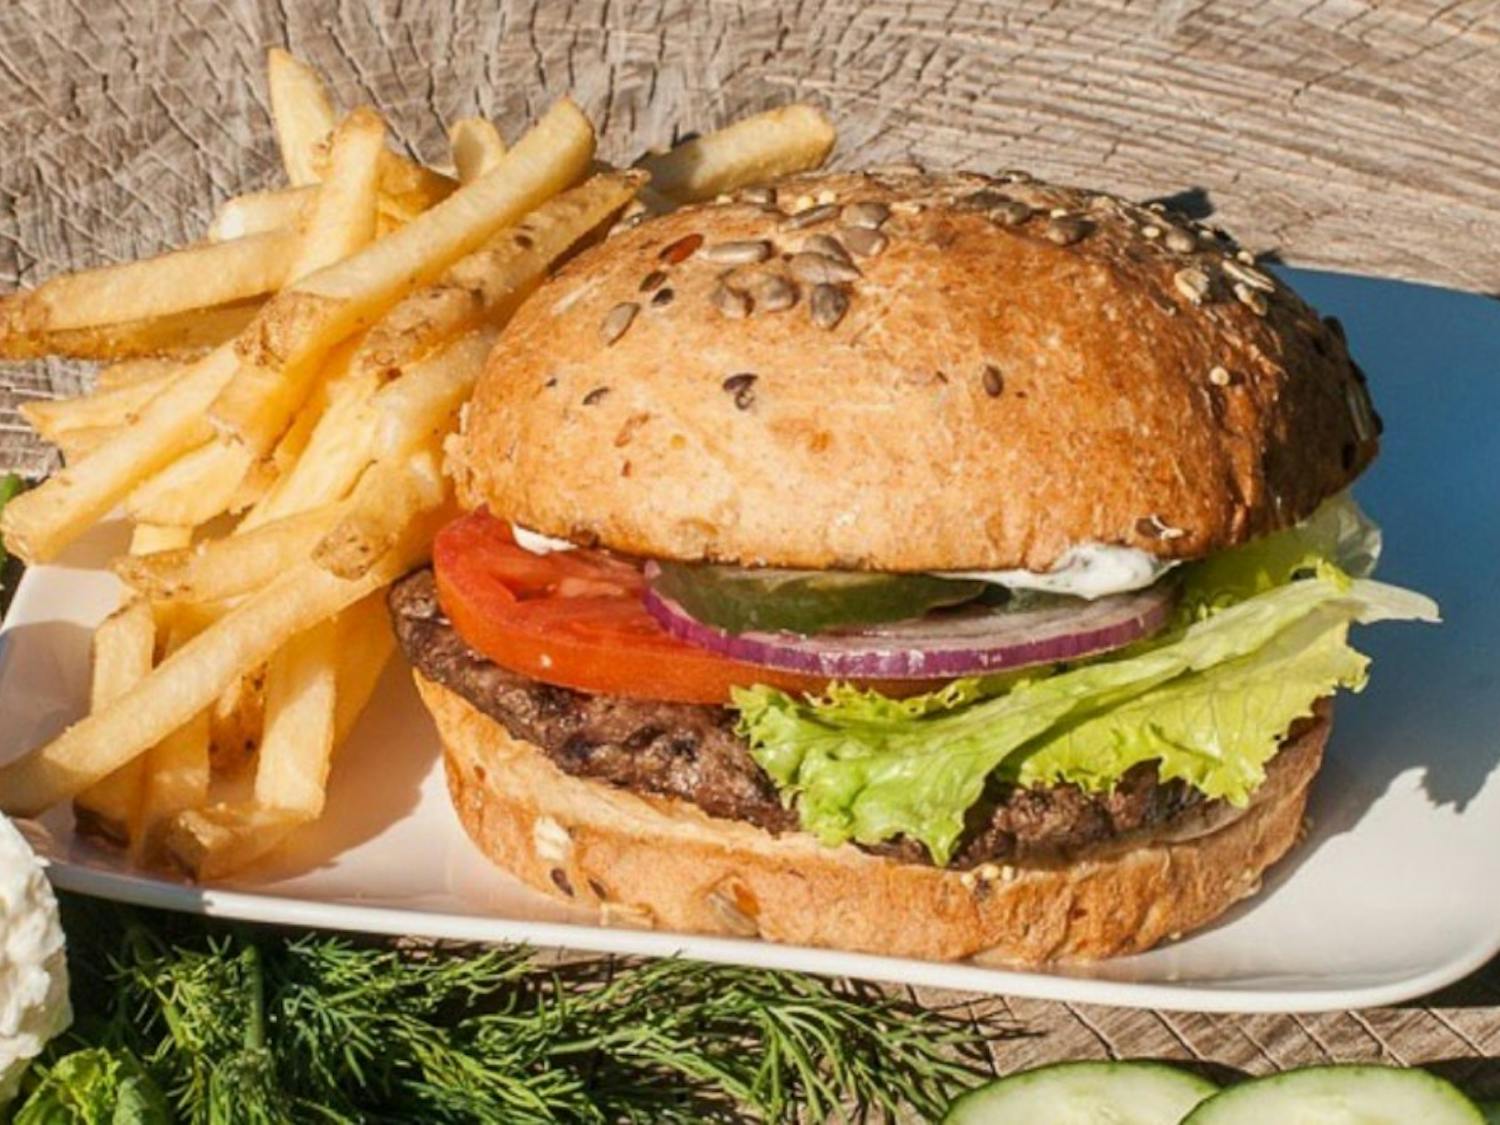 A hamburger and fries are pictured from Joe's Farm Grill.